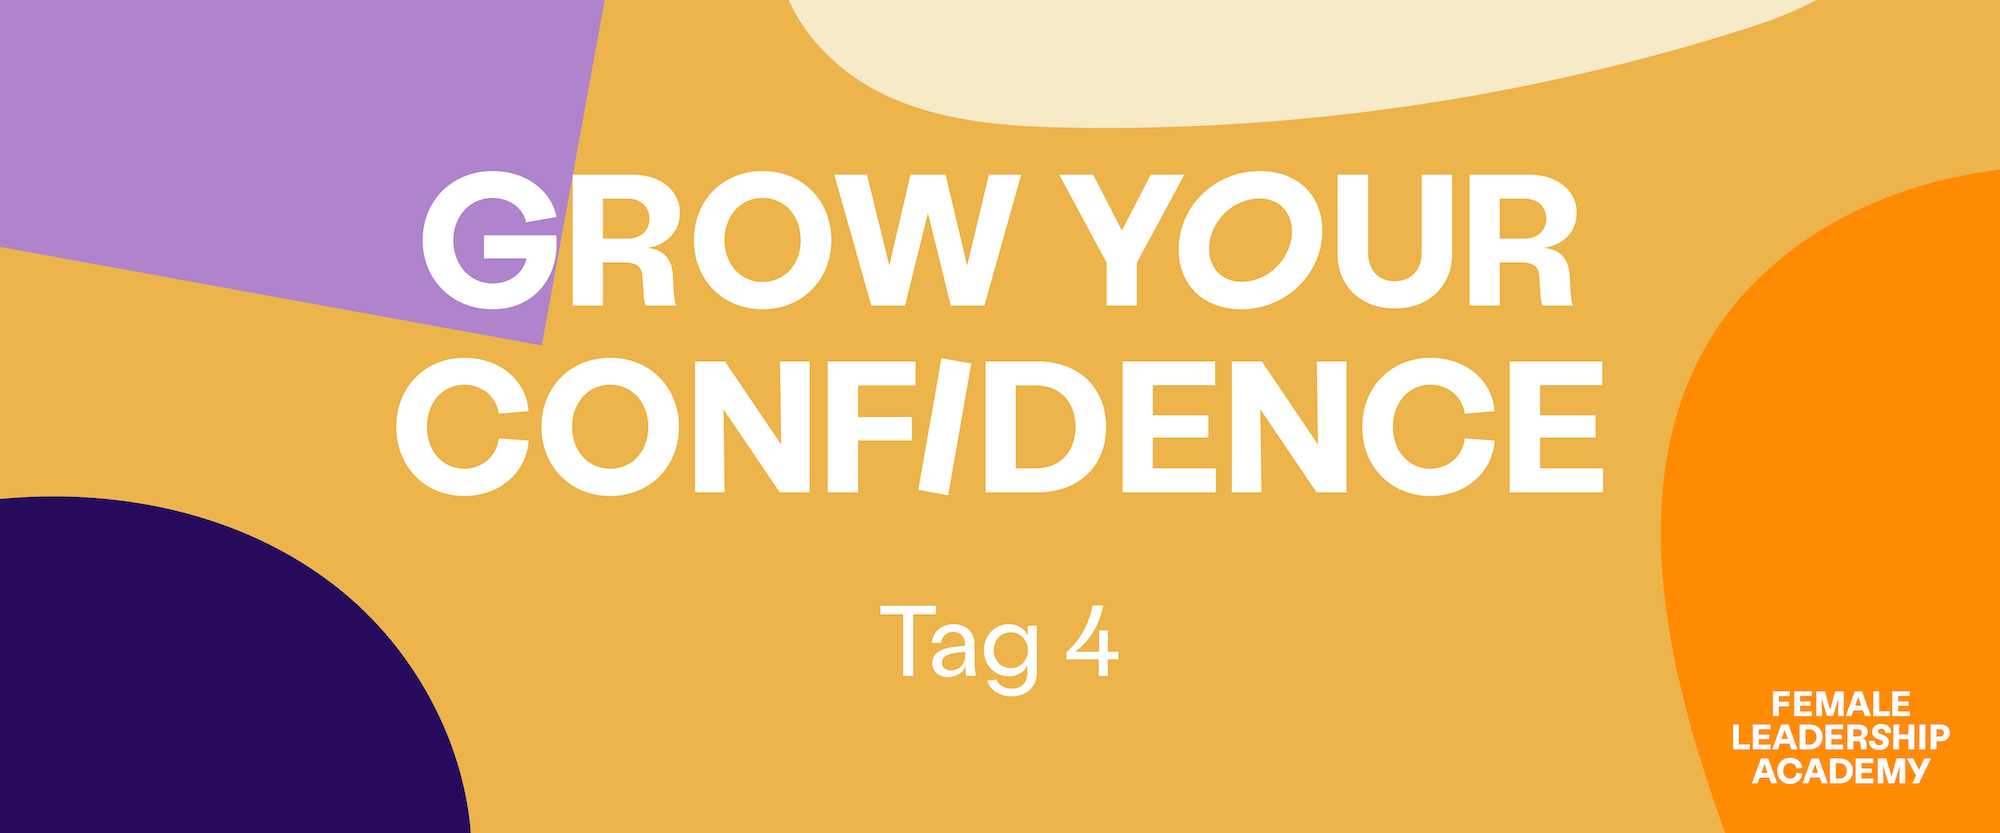 Grow your Confidence - Tag 4